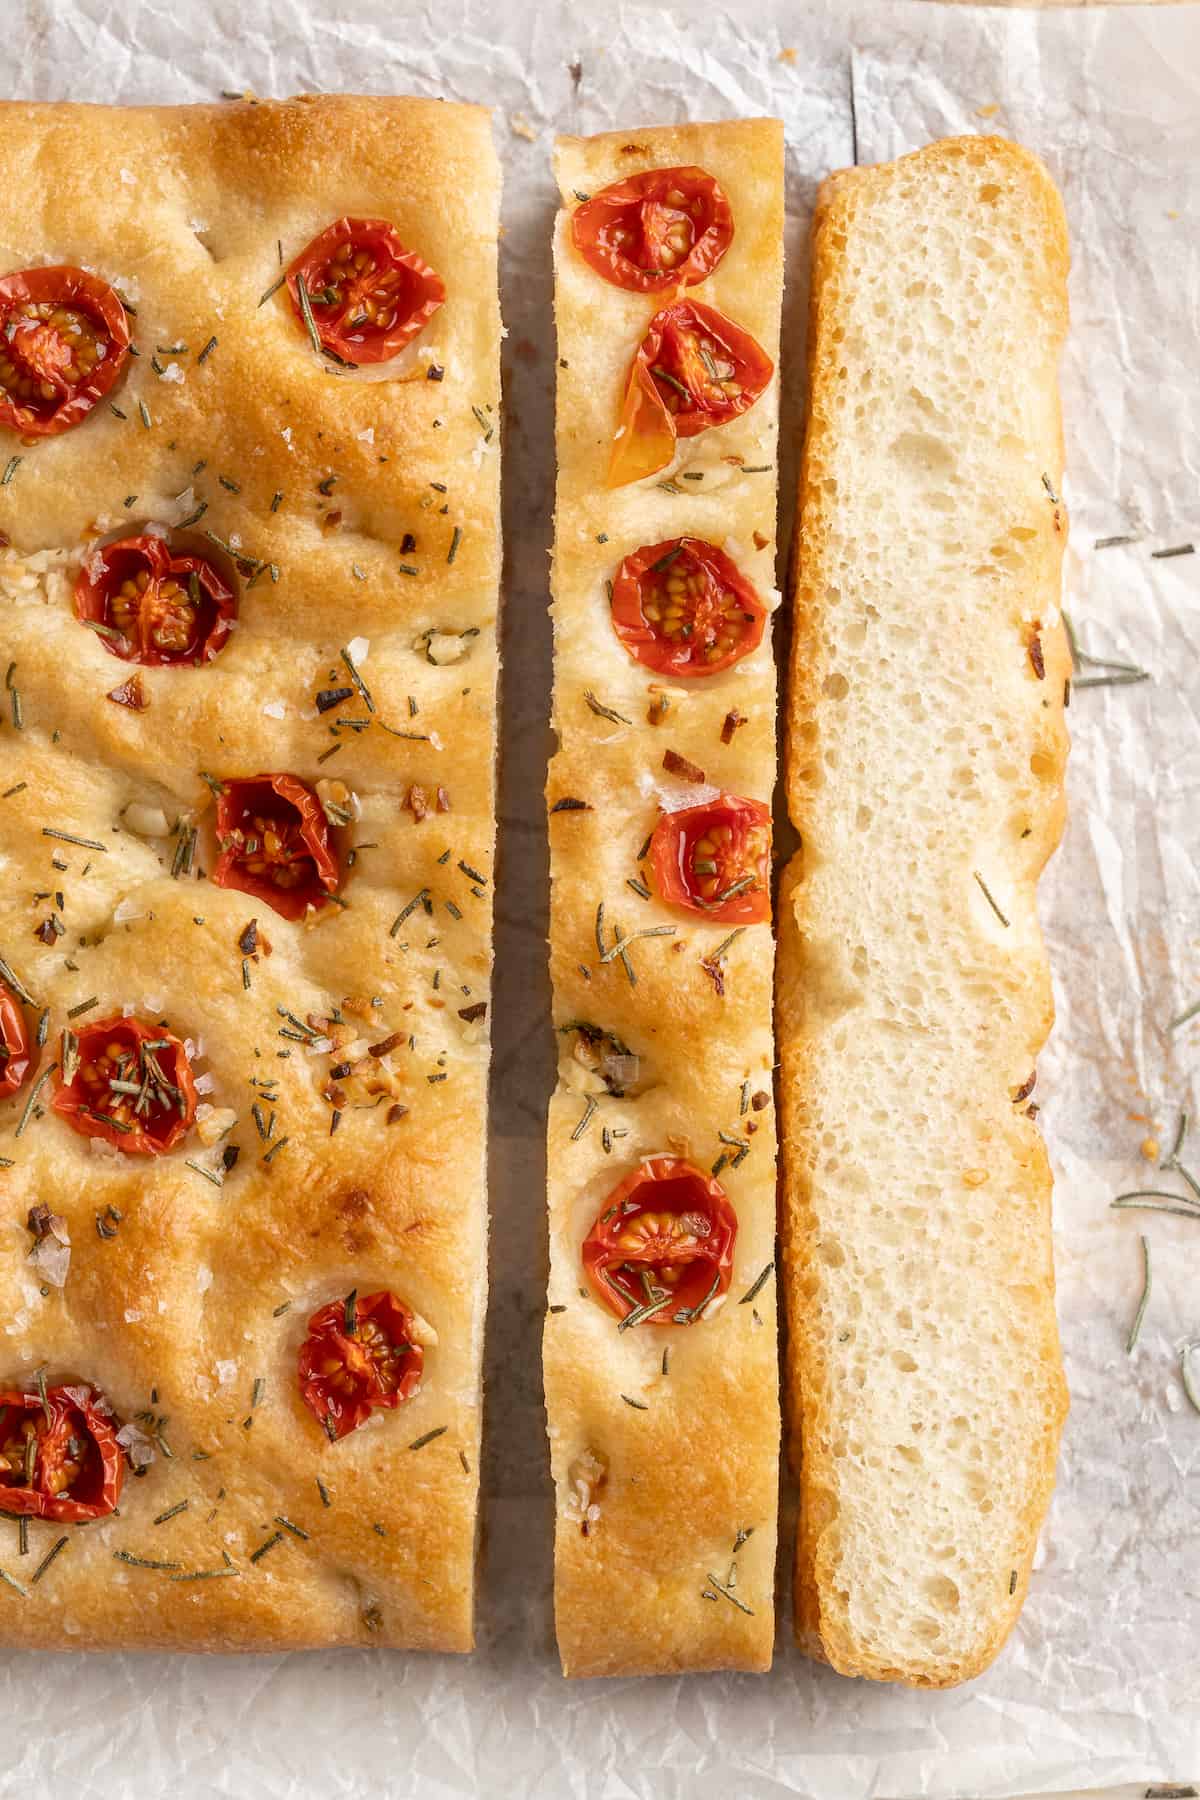 Slices of gluten-free focaccia topped with tomatoes and rosemary